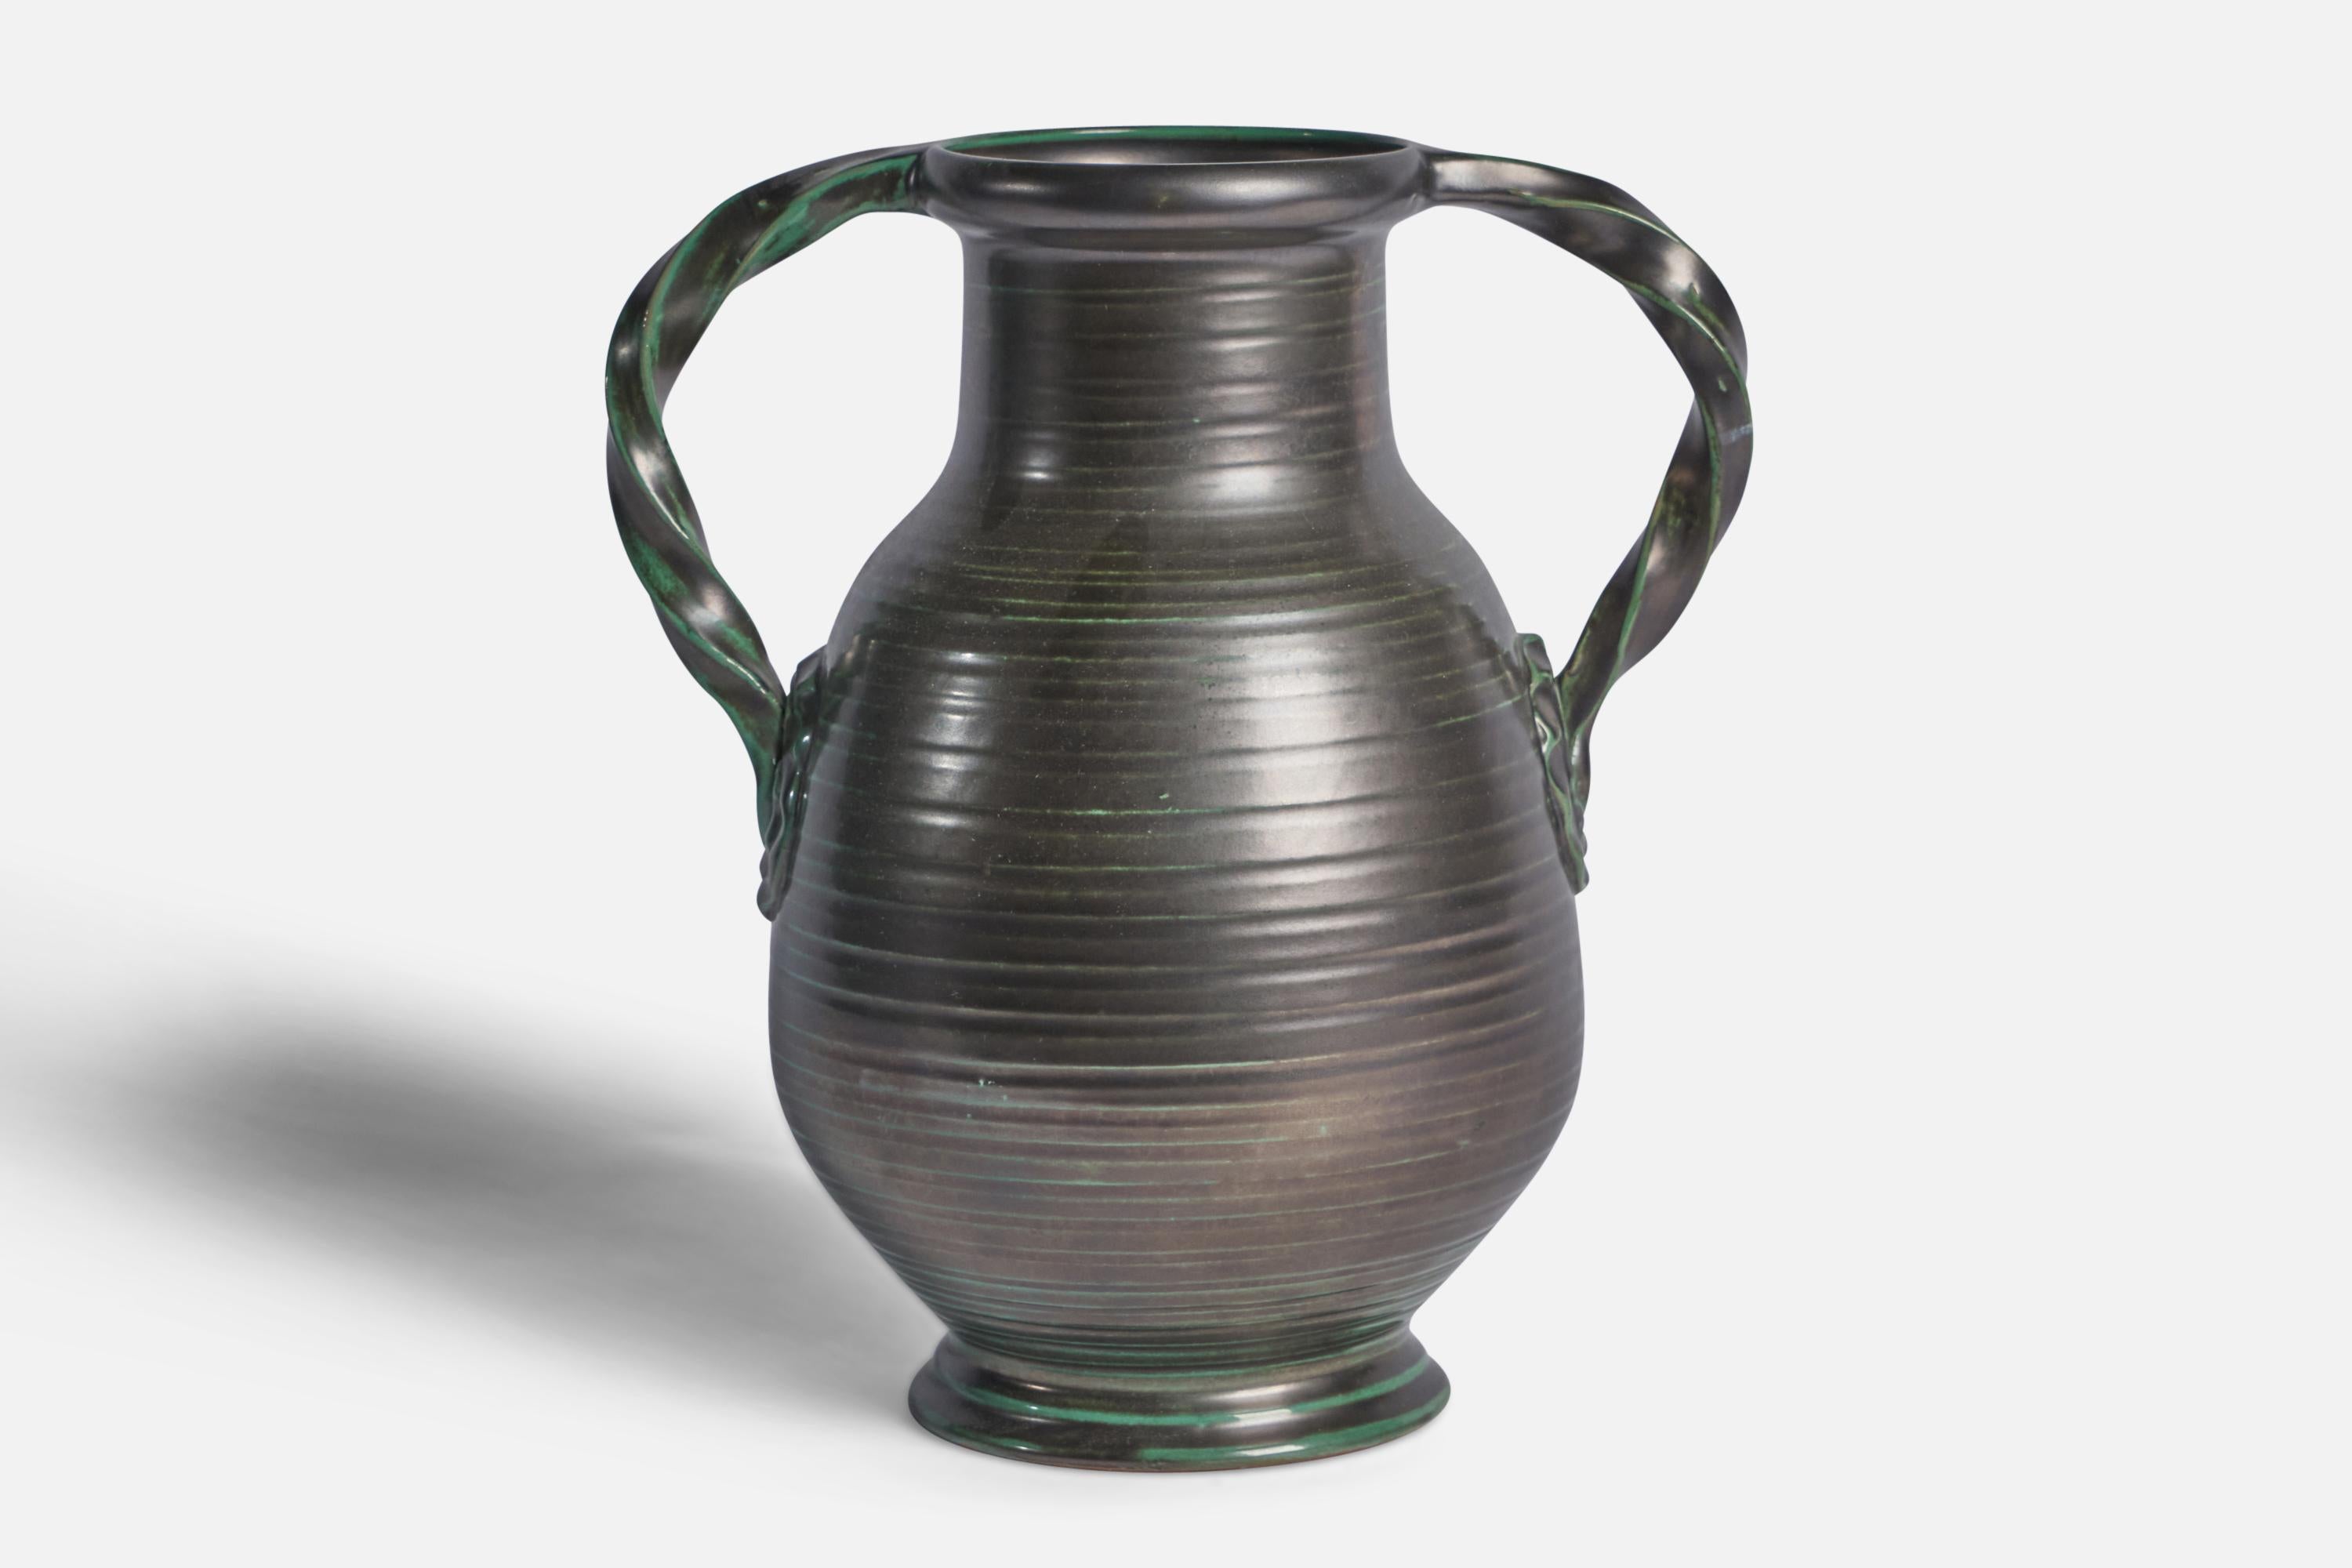 A green-glazed and incised earthenware vase designed and produced by Upsala Ekeby, Sweden, 1930s.